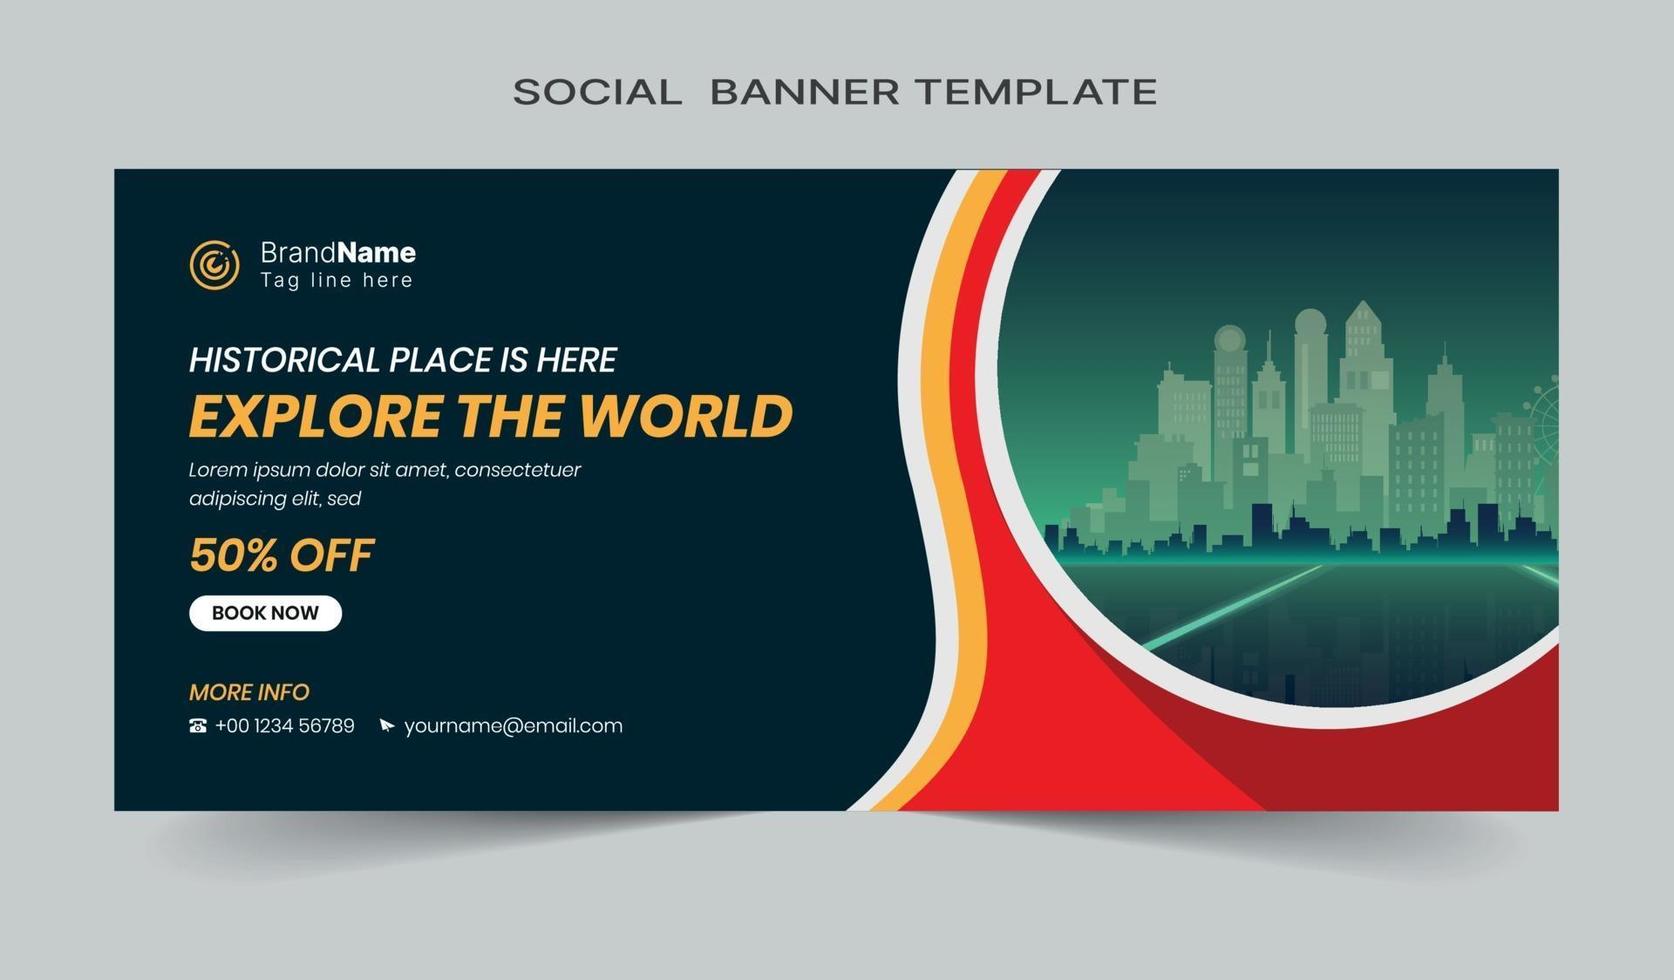 Social media post and web banner template design. Fully editable vector